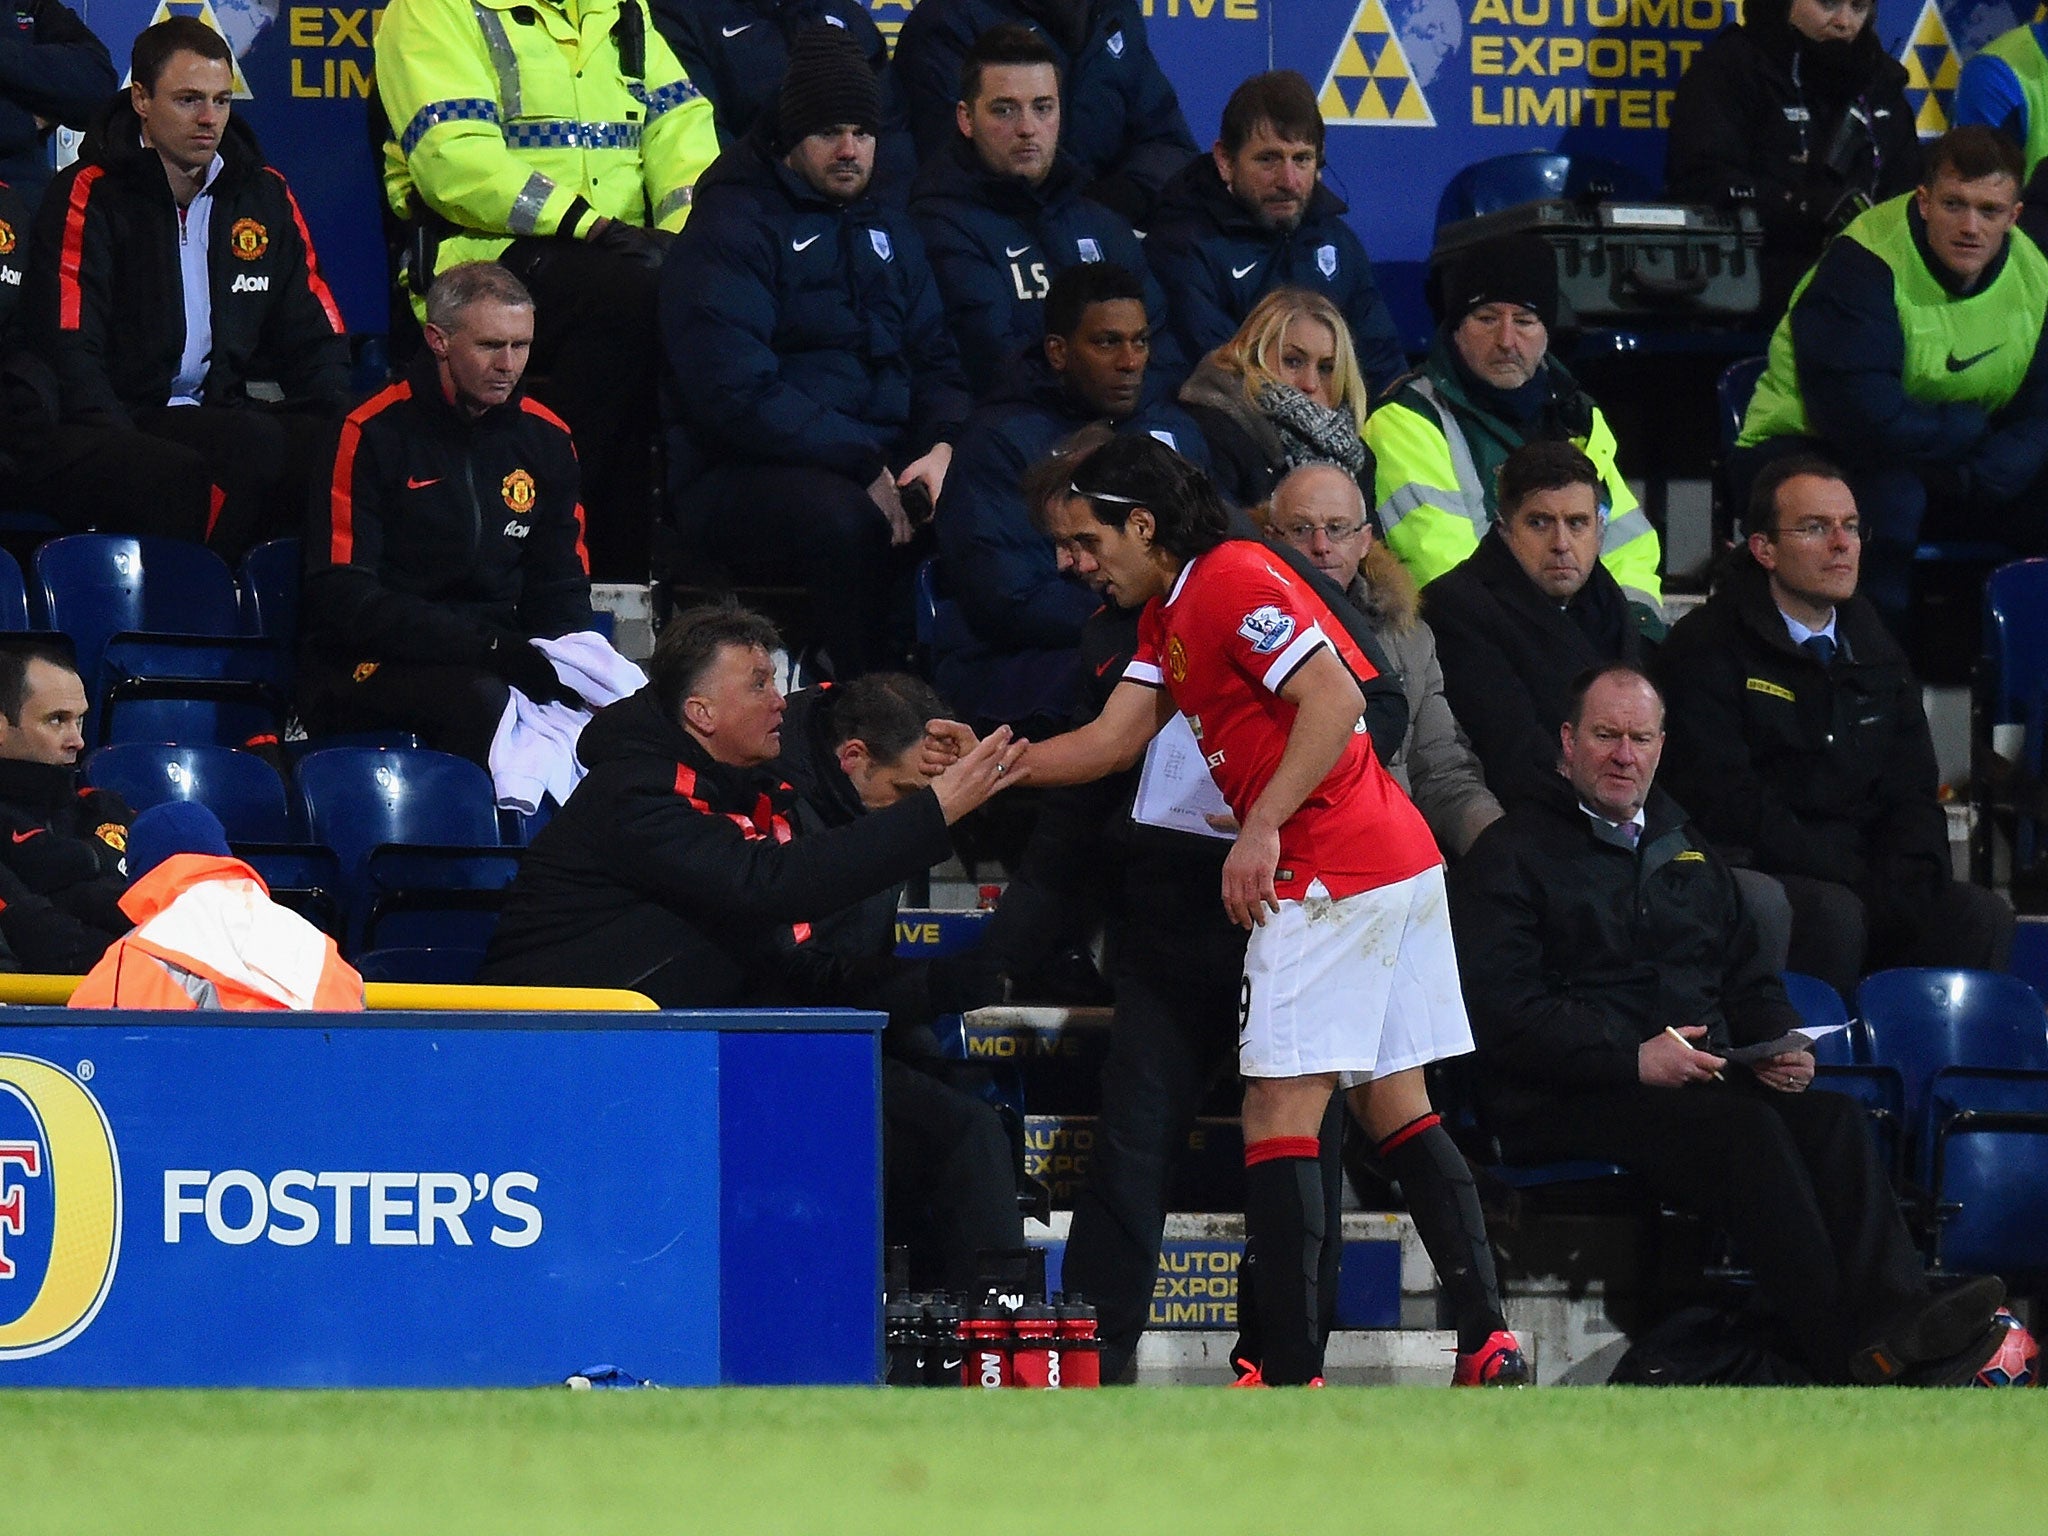 Falcao shakes hands with Van Gaal after his substitution